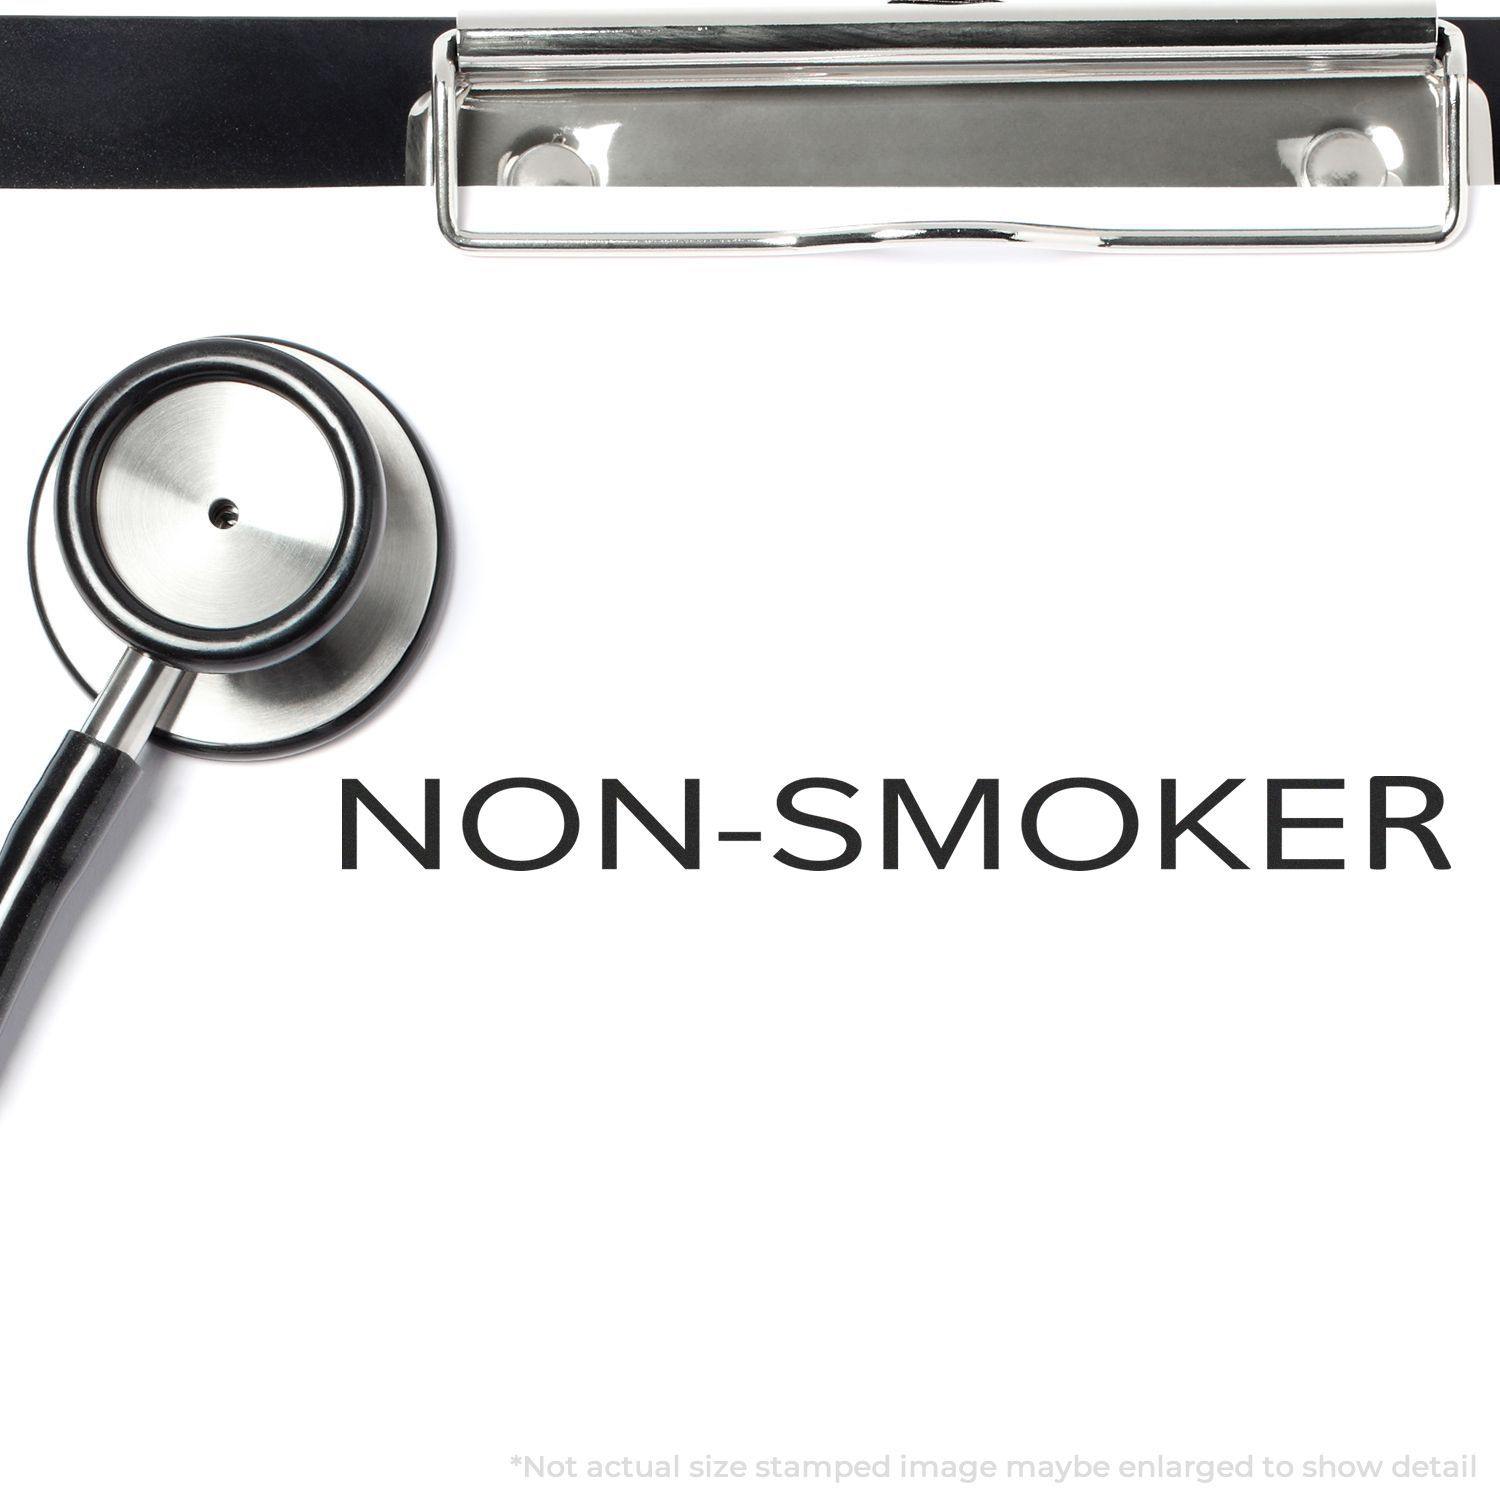 A stock office rubber stamp with a stamped image showing how the text "NON-SMOKER" in a narrow font is displayed after stamping.